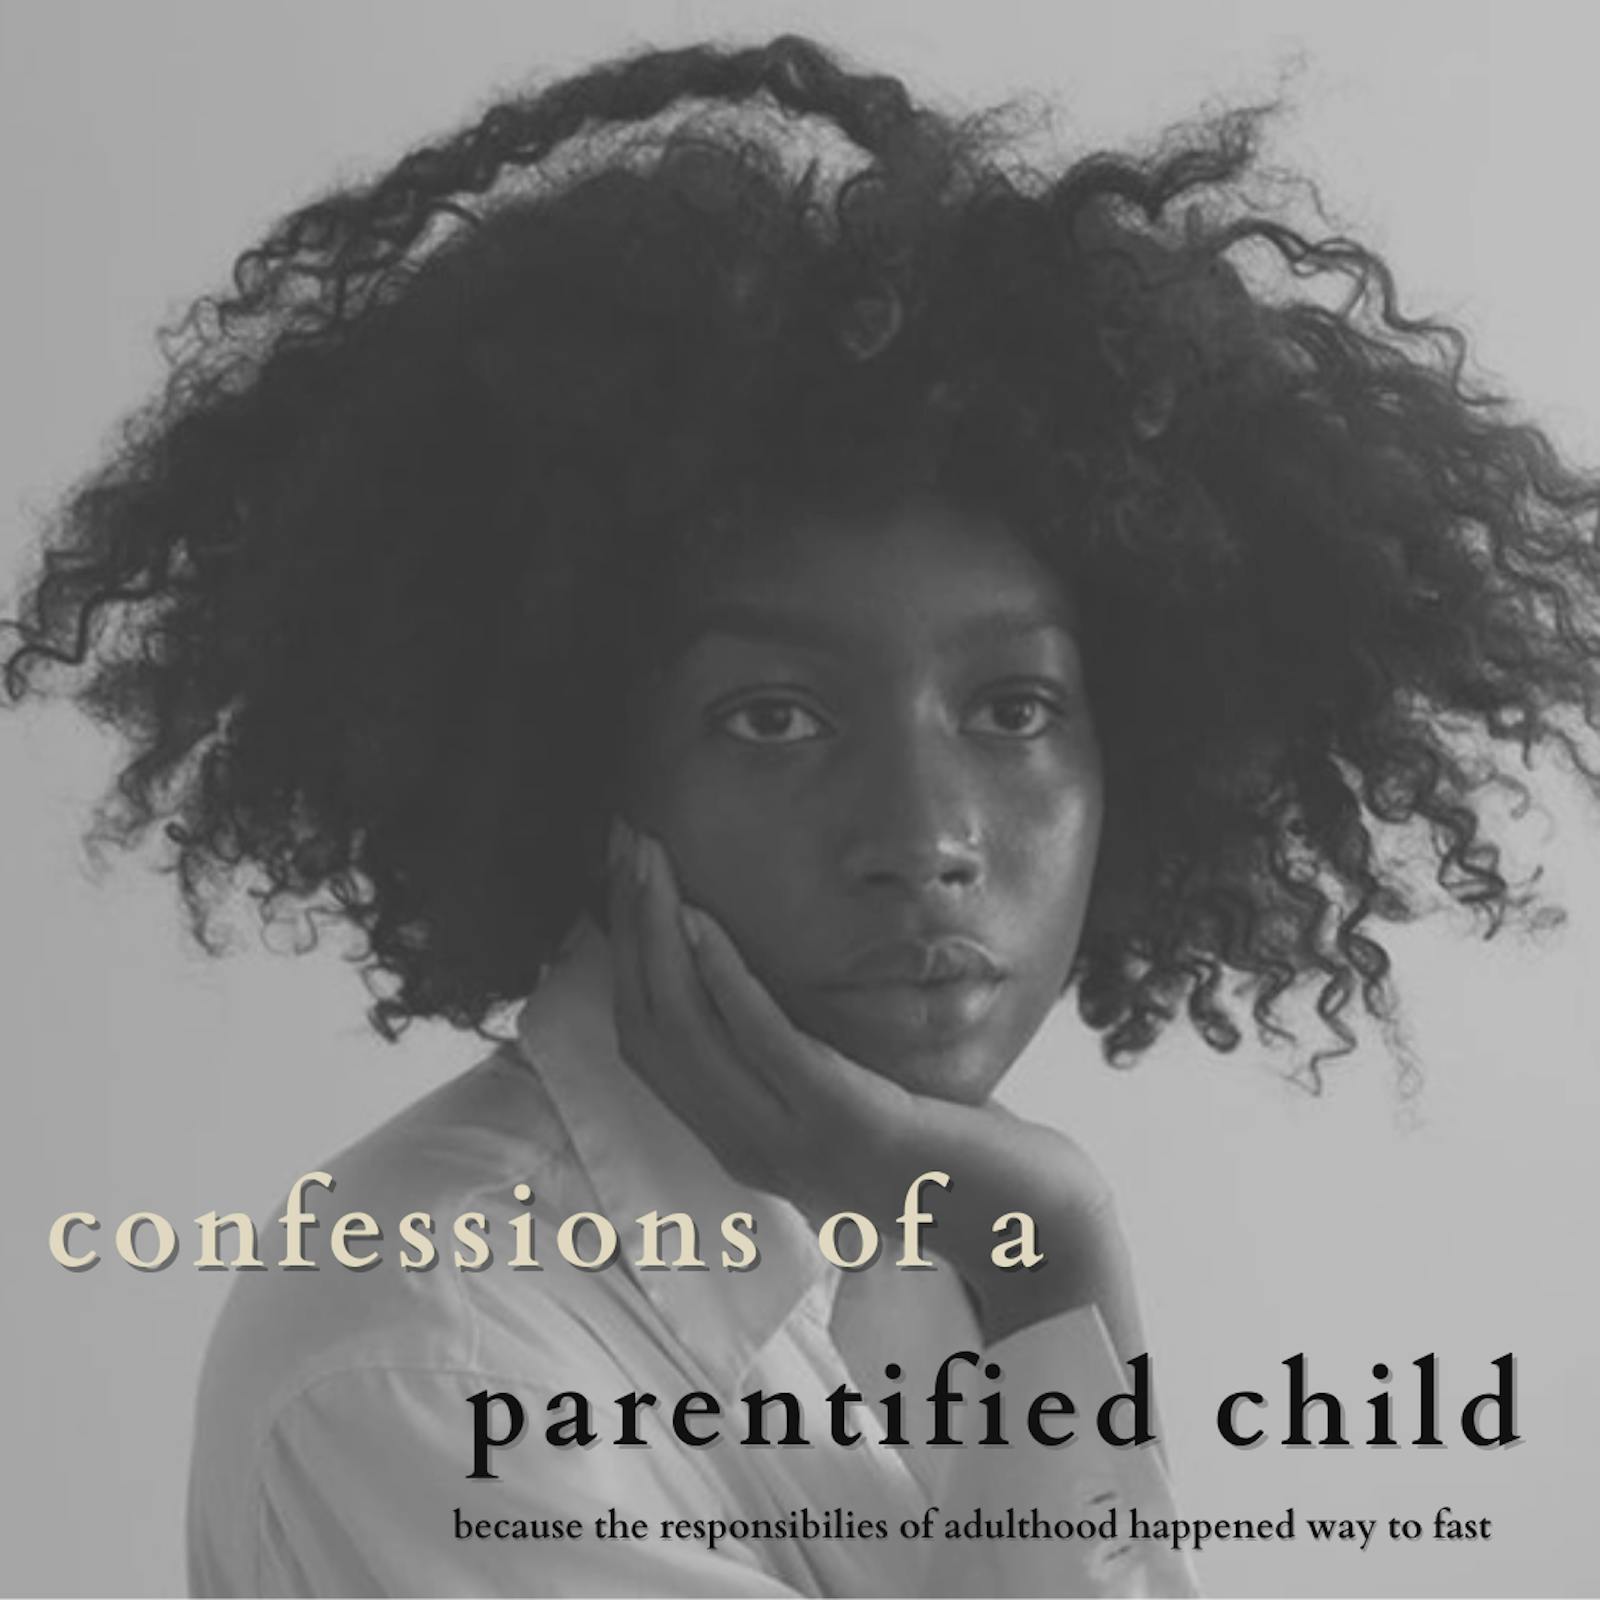 BLOG: 15 Going On 30: let's talk about parentification